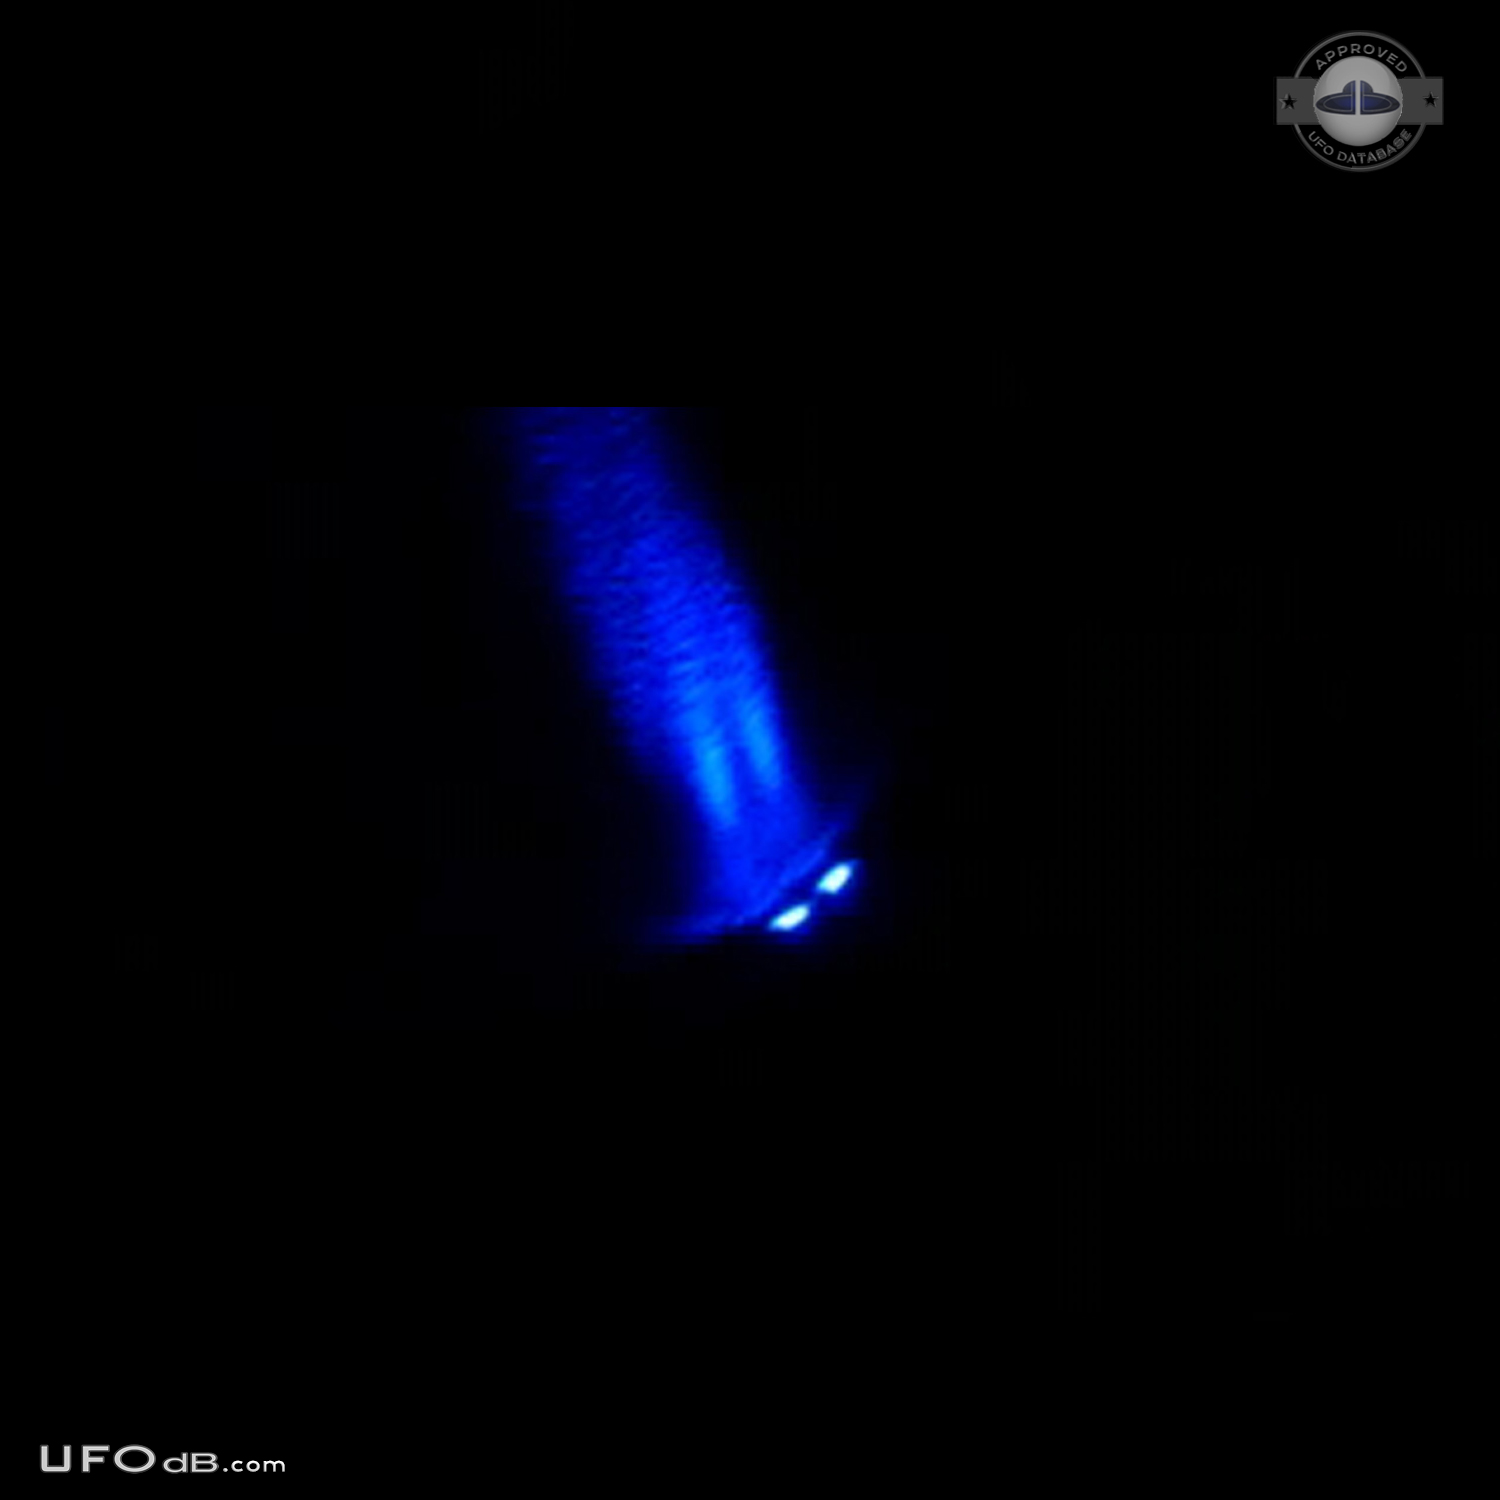 Incredible UFO images taken from video - Pipestone, Minnesota - 2012 UFO Picture #536-2